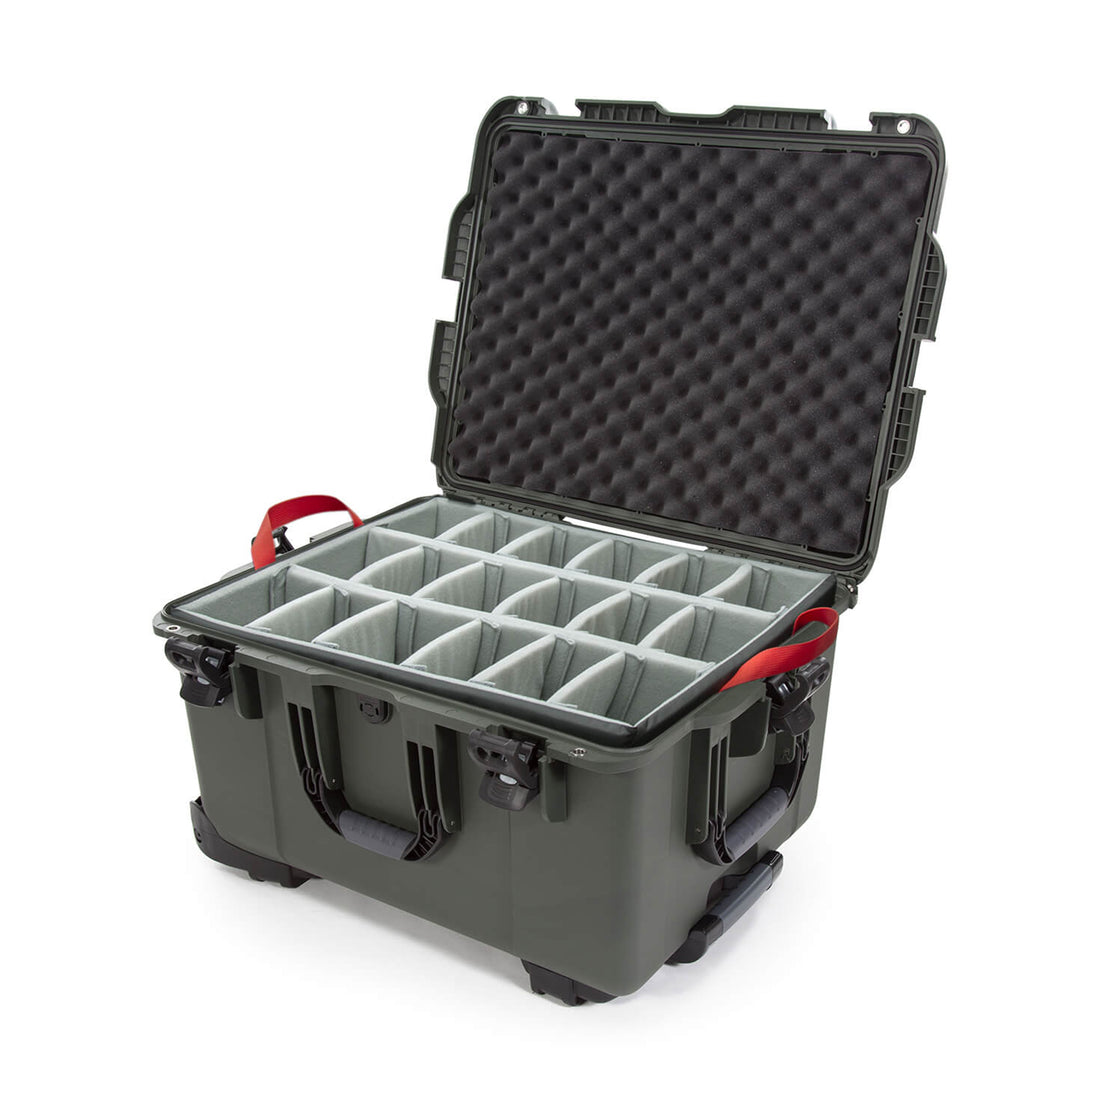 Nanuk 960-2006 Waterproof Hard Case with Wheels and Padded Divider - Olive